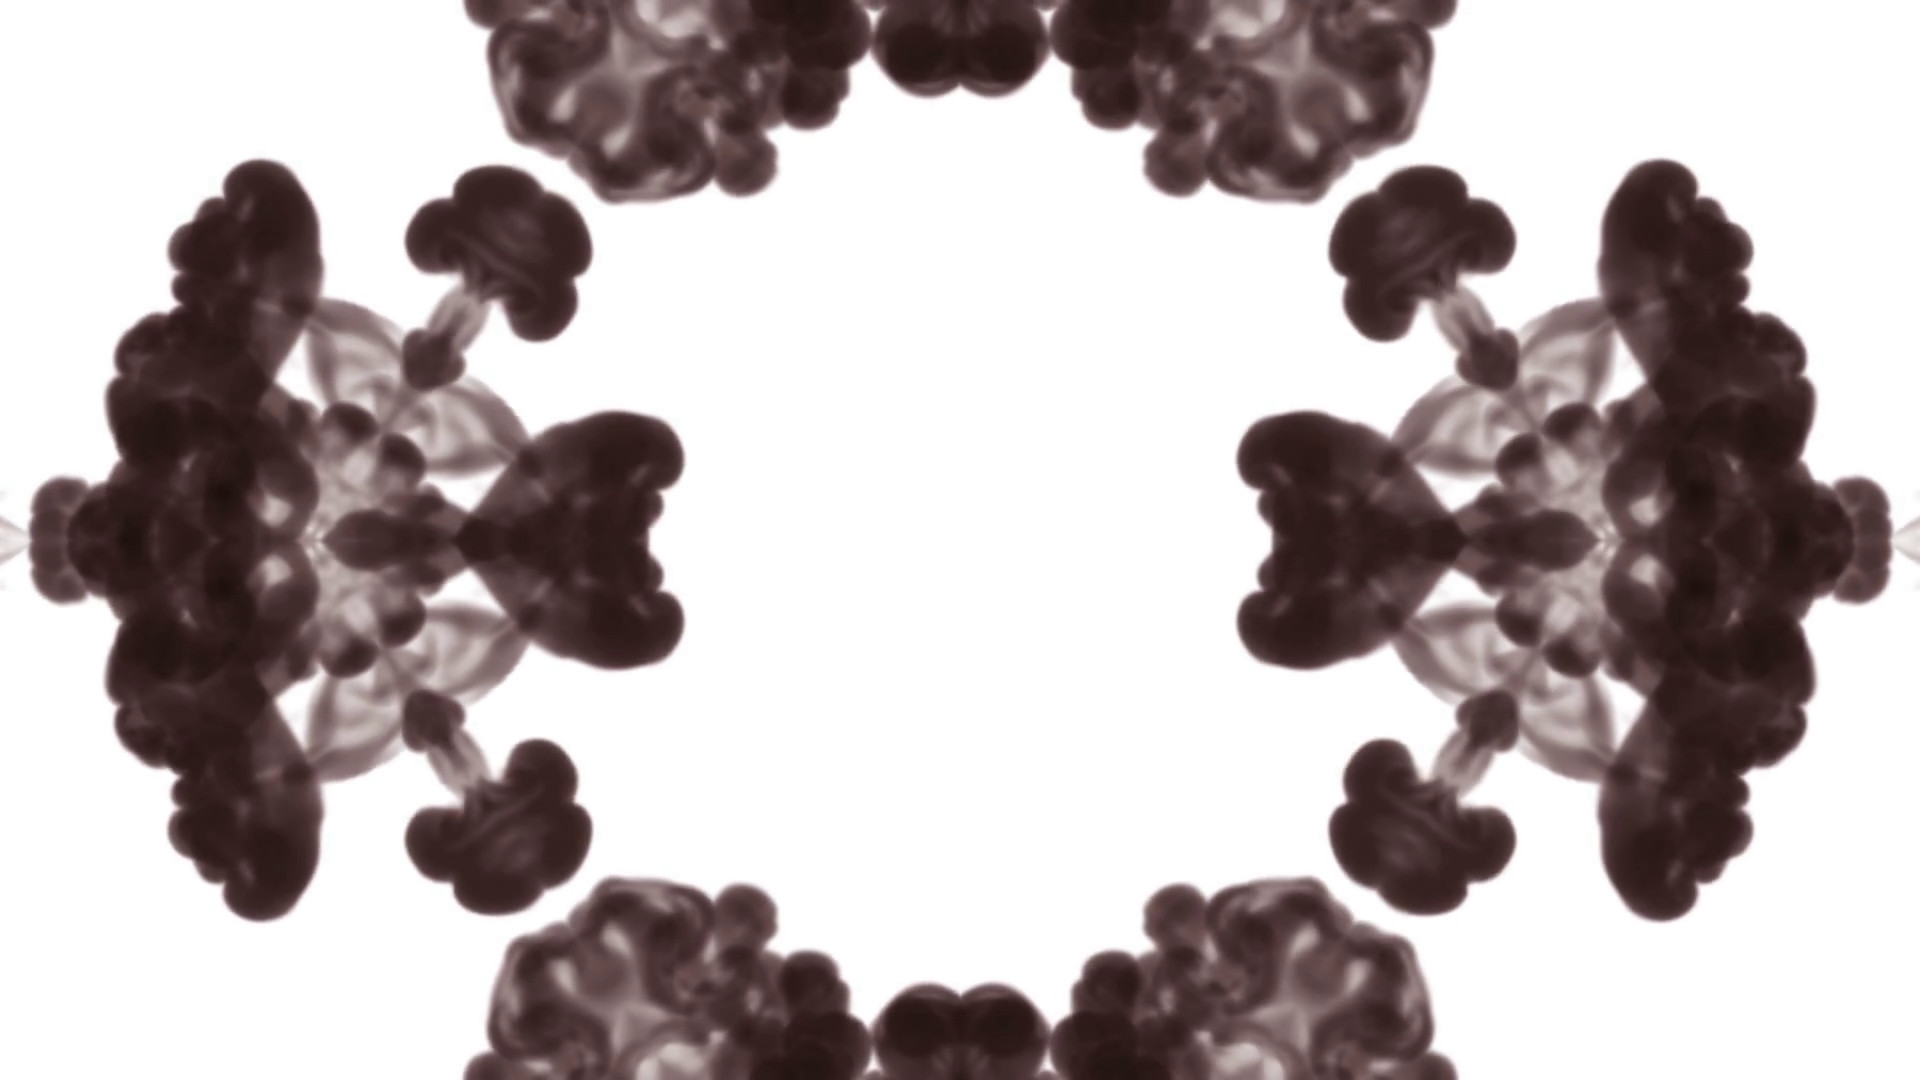 1920x1080 Abstract black and white background of ink or smoke flows is kaleidoscope  or Rorschach inkblot test in slow motion. Black Ink inject in water.